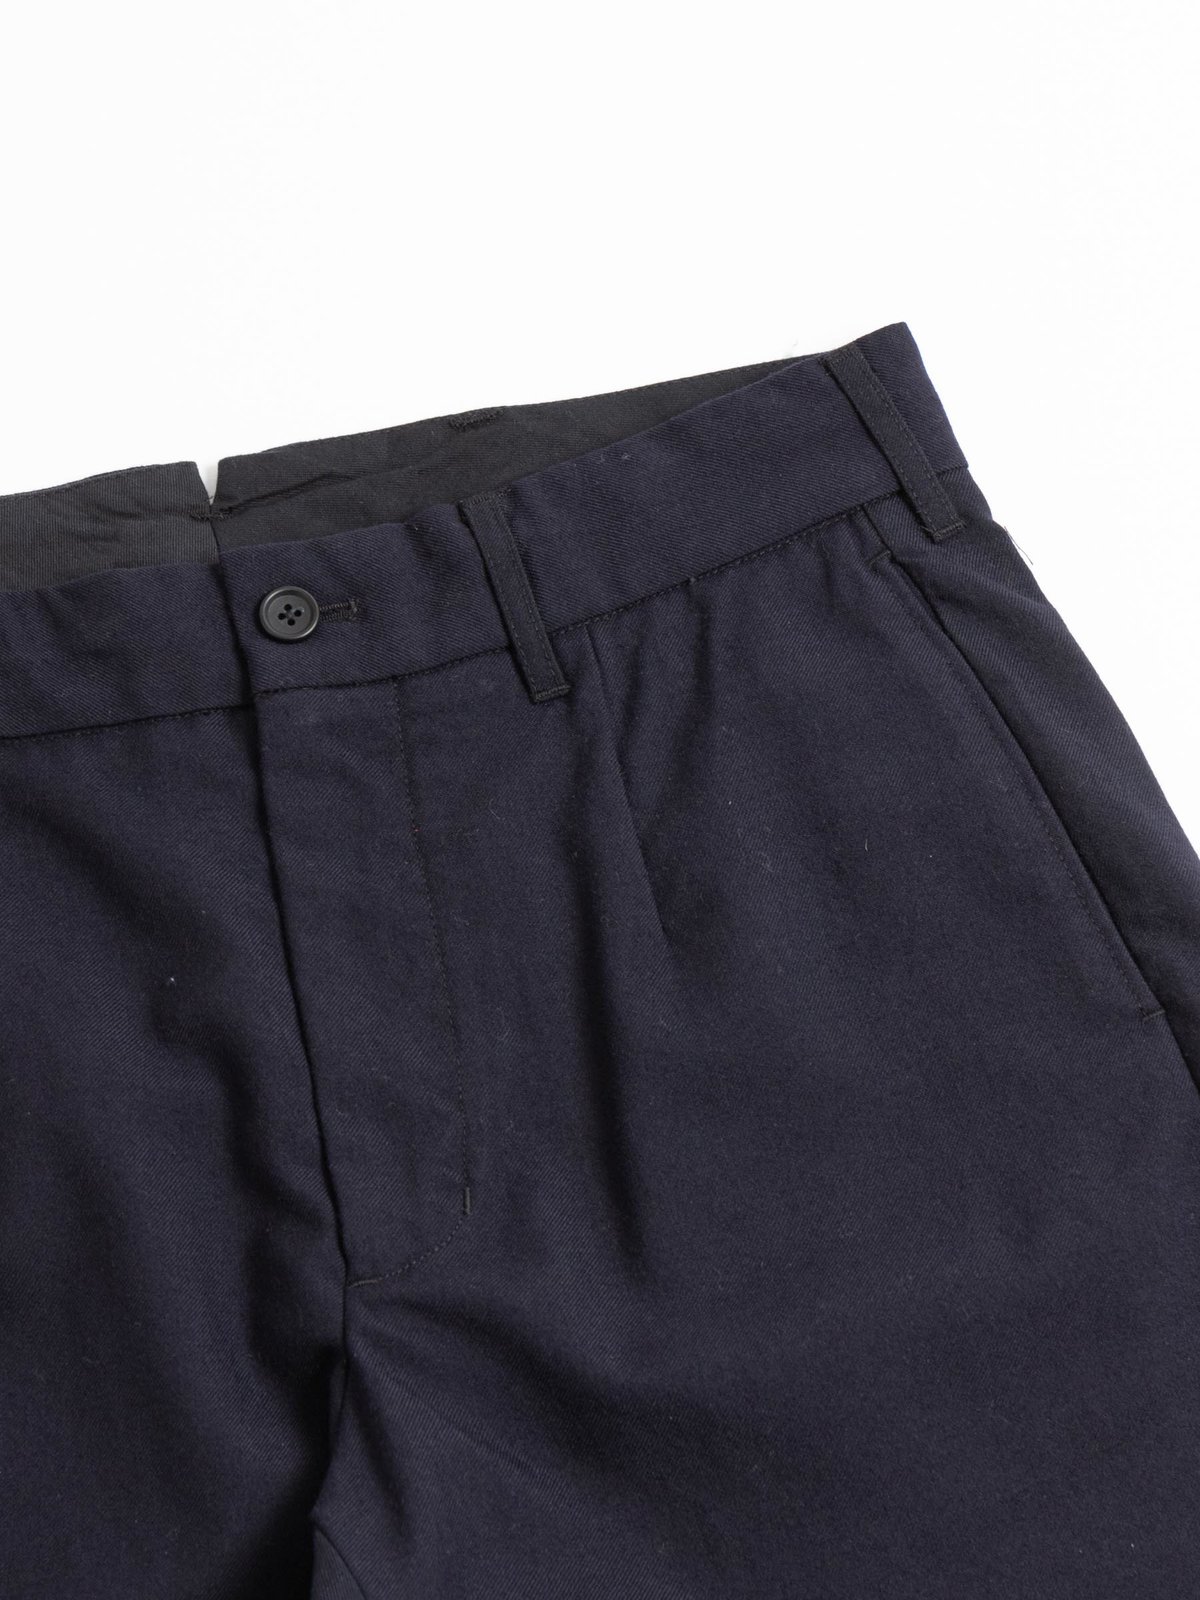 ANDOVER PANT DARK NAVY UNIFORM SERGE by Engineered Garments – The 